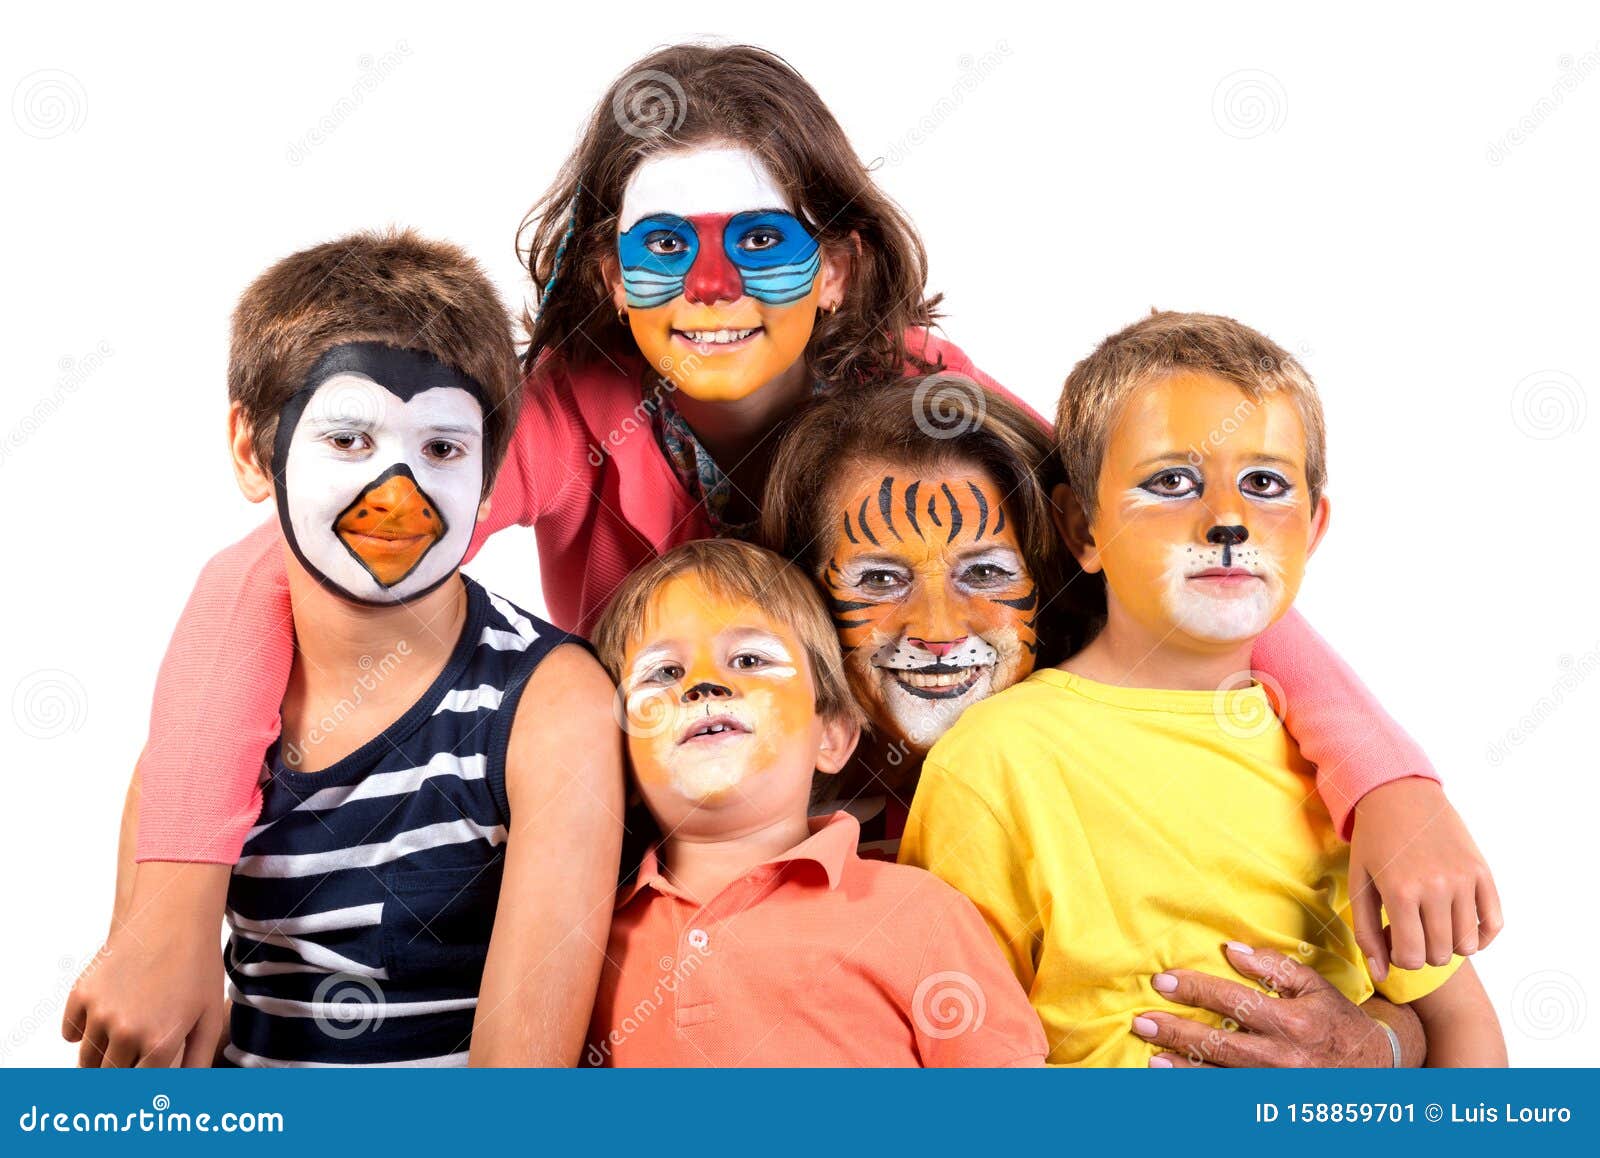 Kids and Granny with Face-paint Stock Image - Image of granny, boys ...